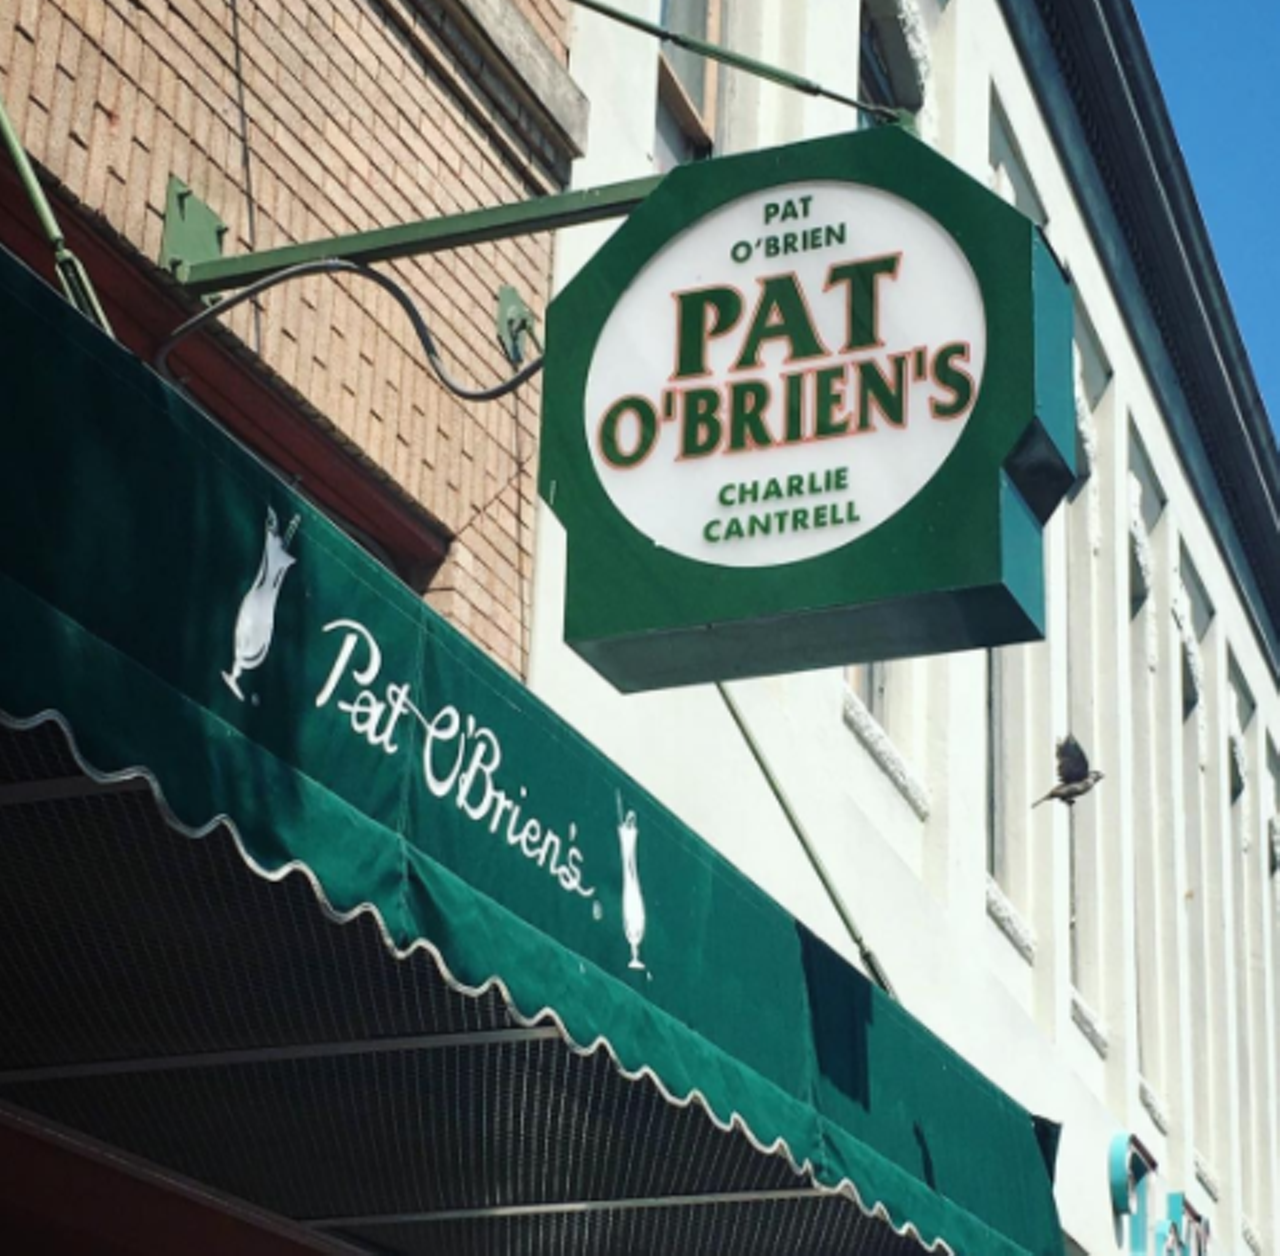 Pat O’Brien’s
121 Alamo Plaza, (210) 220-1076, patobriens.com
What's better than Sunday brunch? Sunday brunch with live music, brought to you by Pat O'Brien's.
Photo via Instagram, patobrienssa